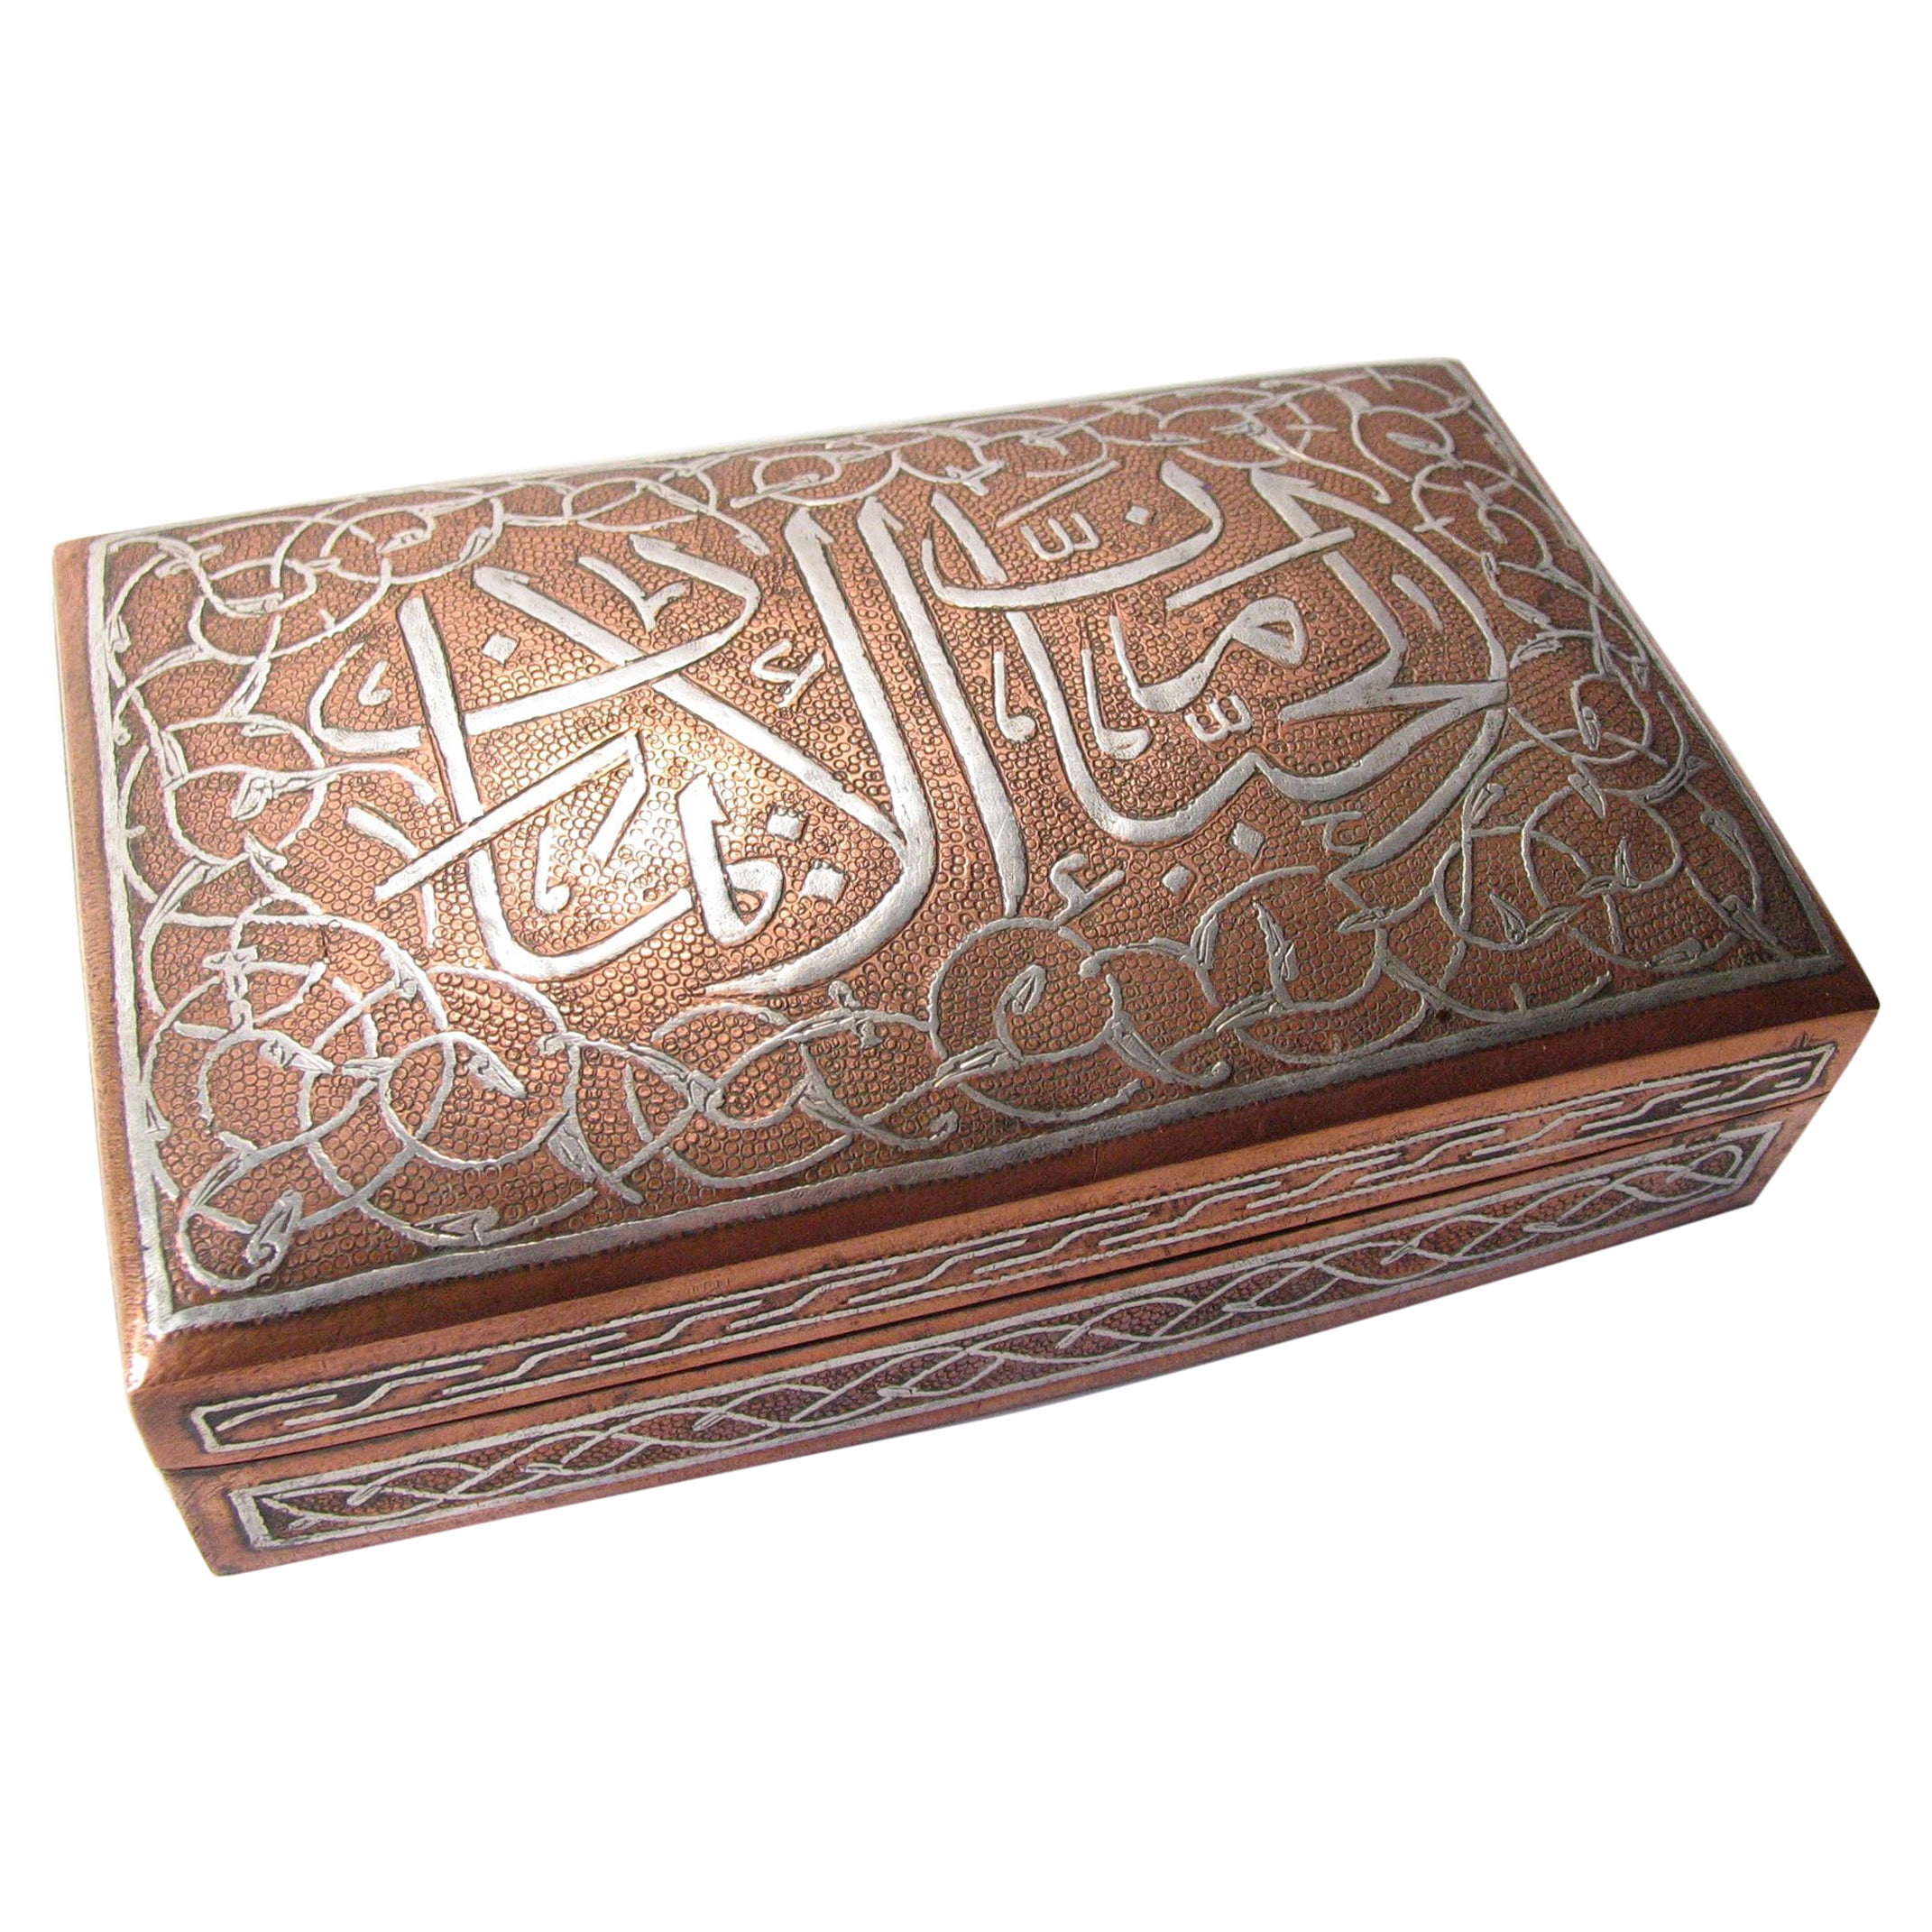 Damascened Copper Jewelry Box With Silver Islamic Calligraphy Inlay